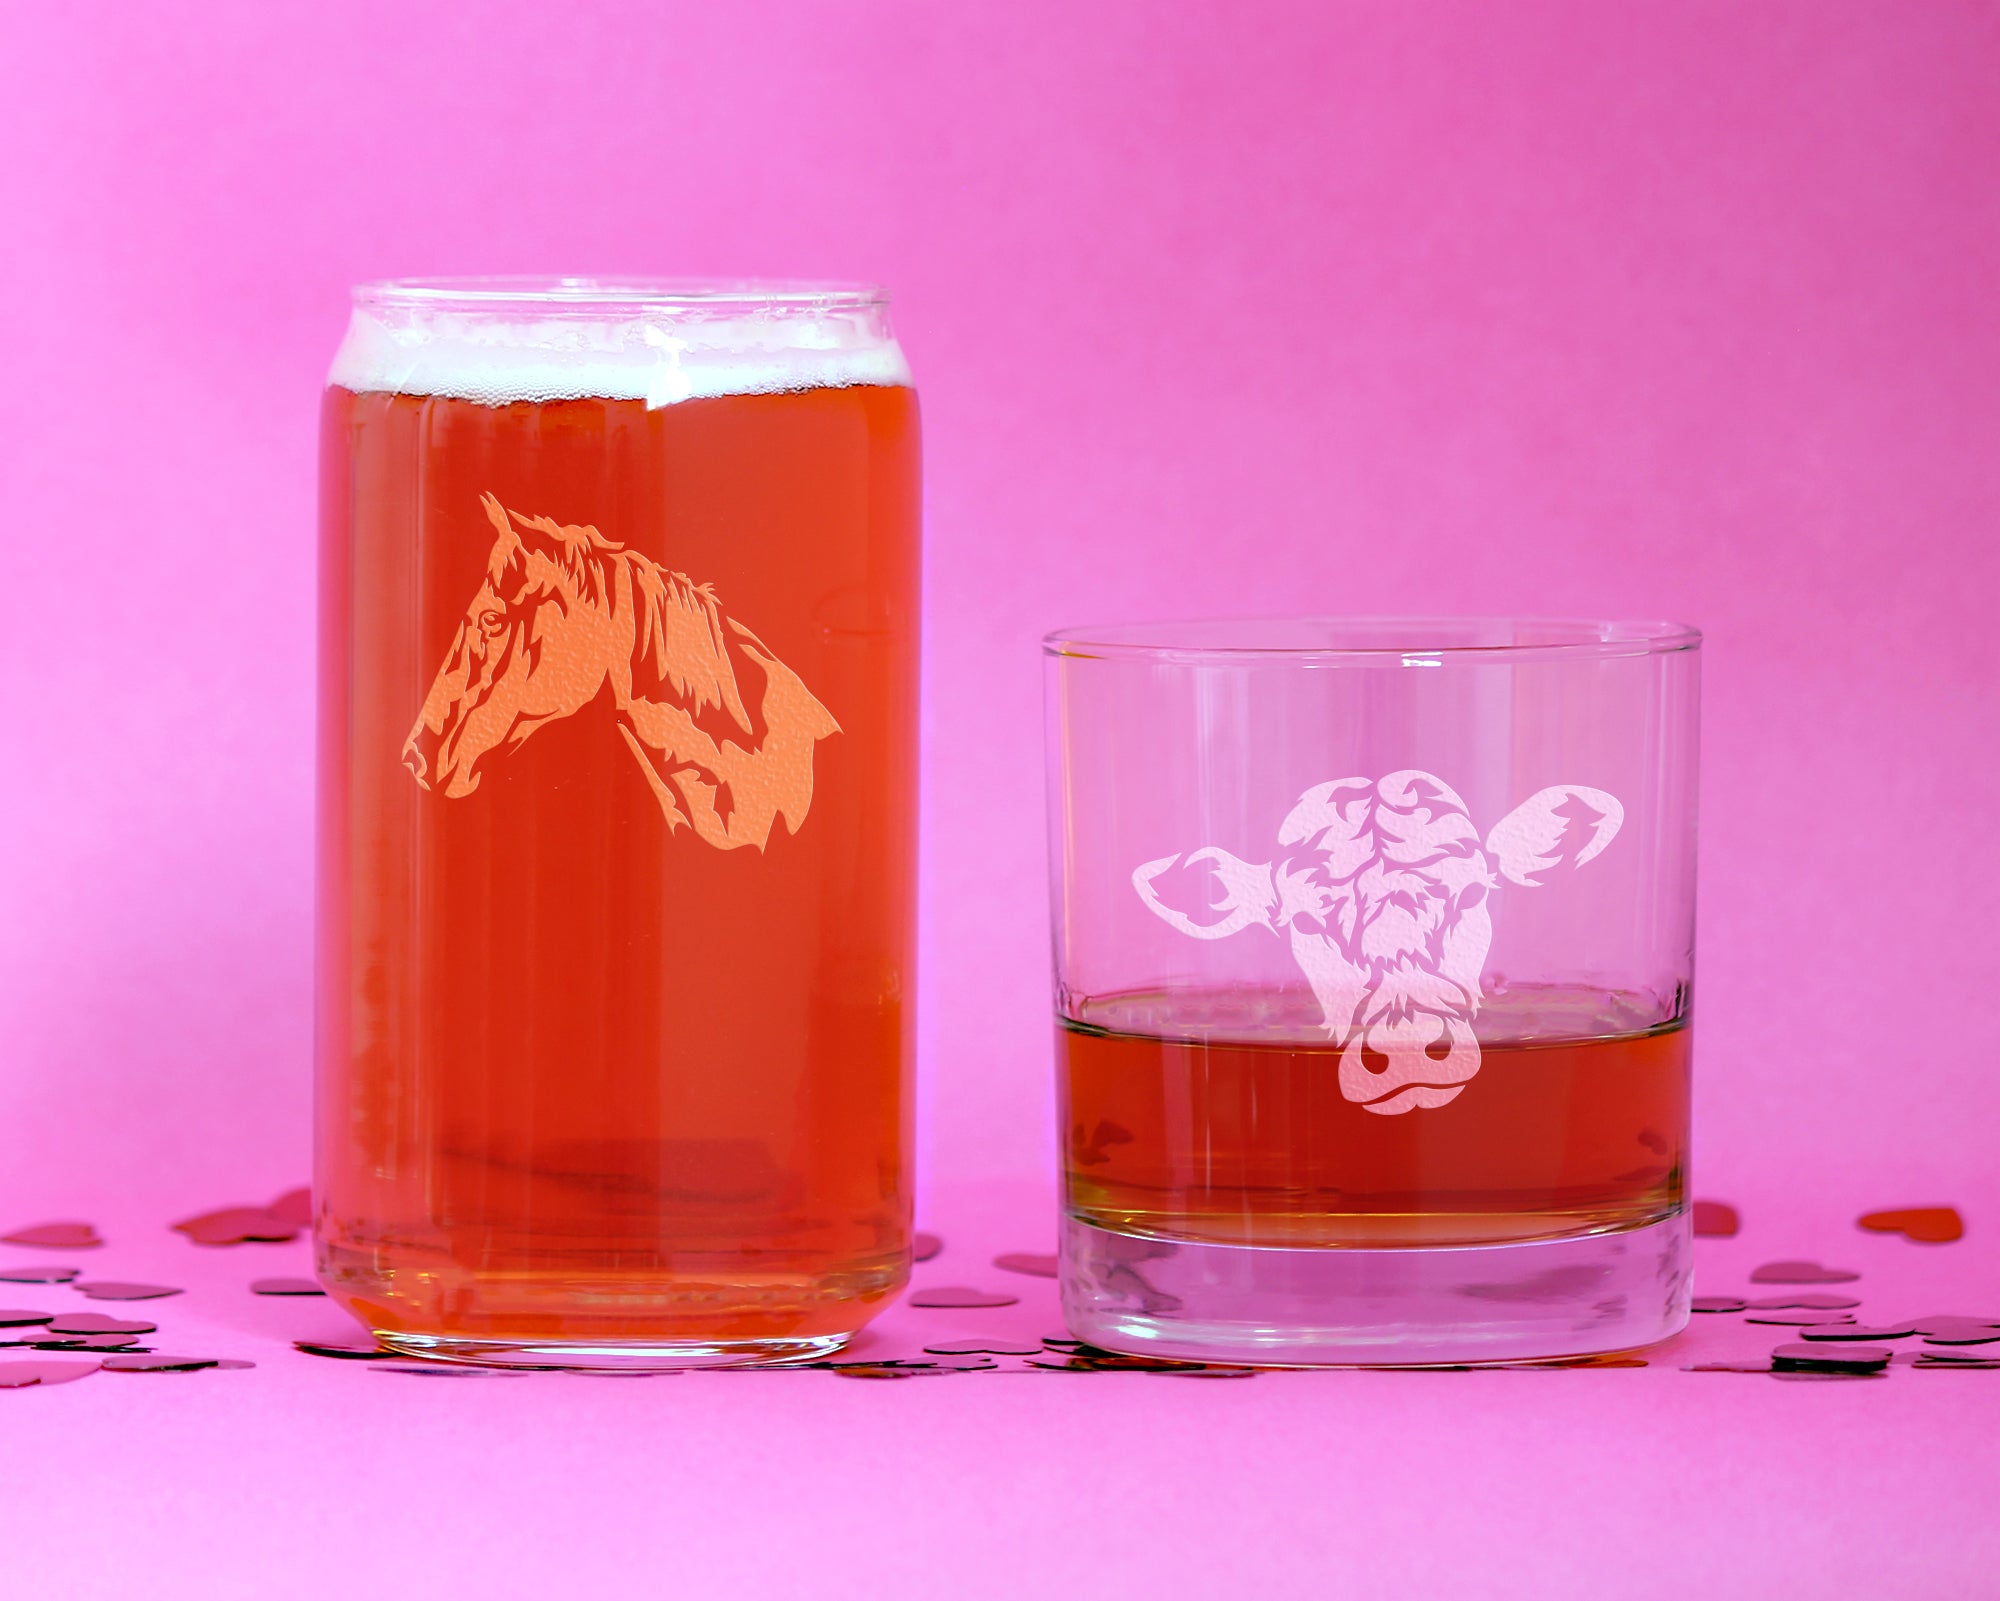 Cow & Horse Face Glasses